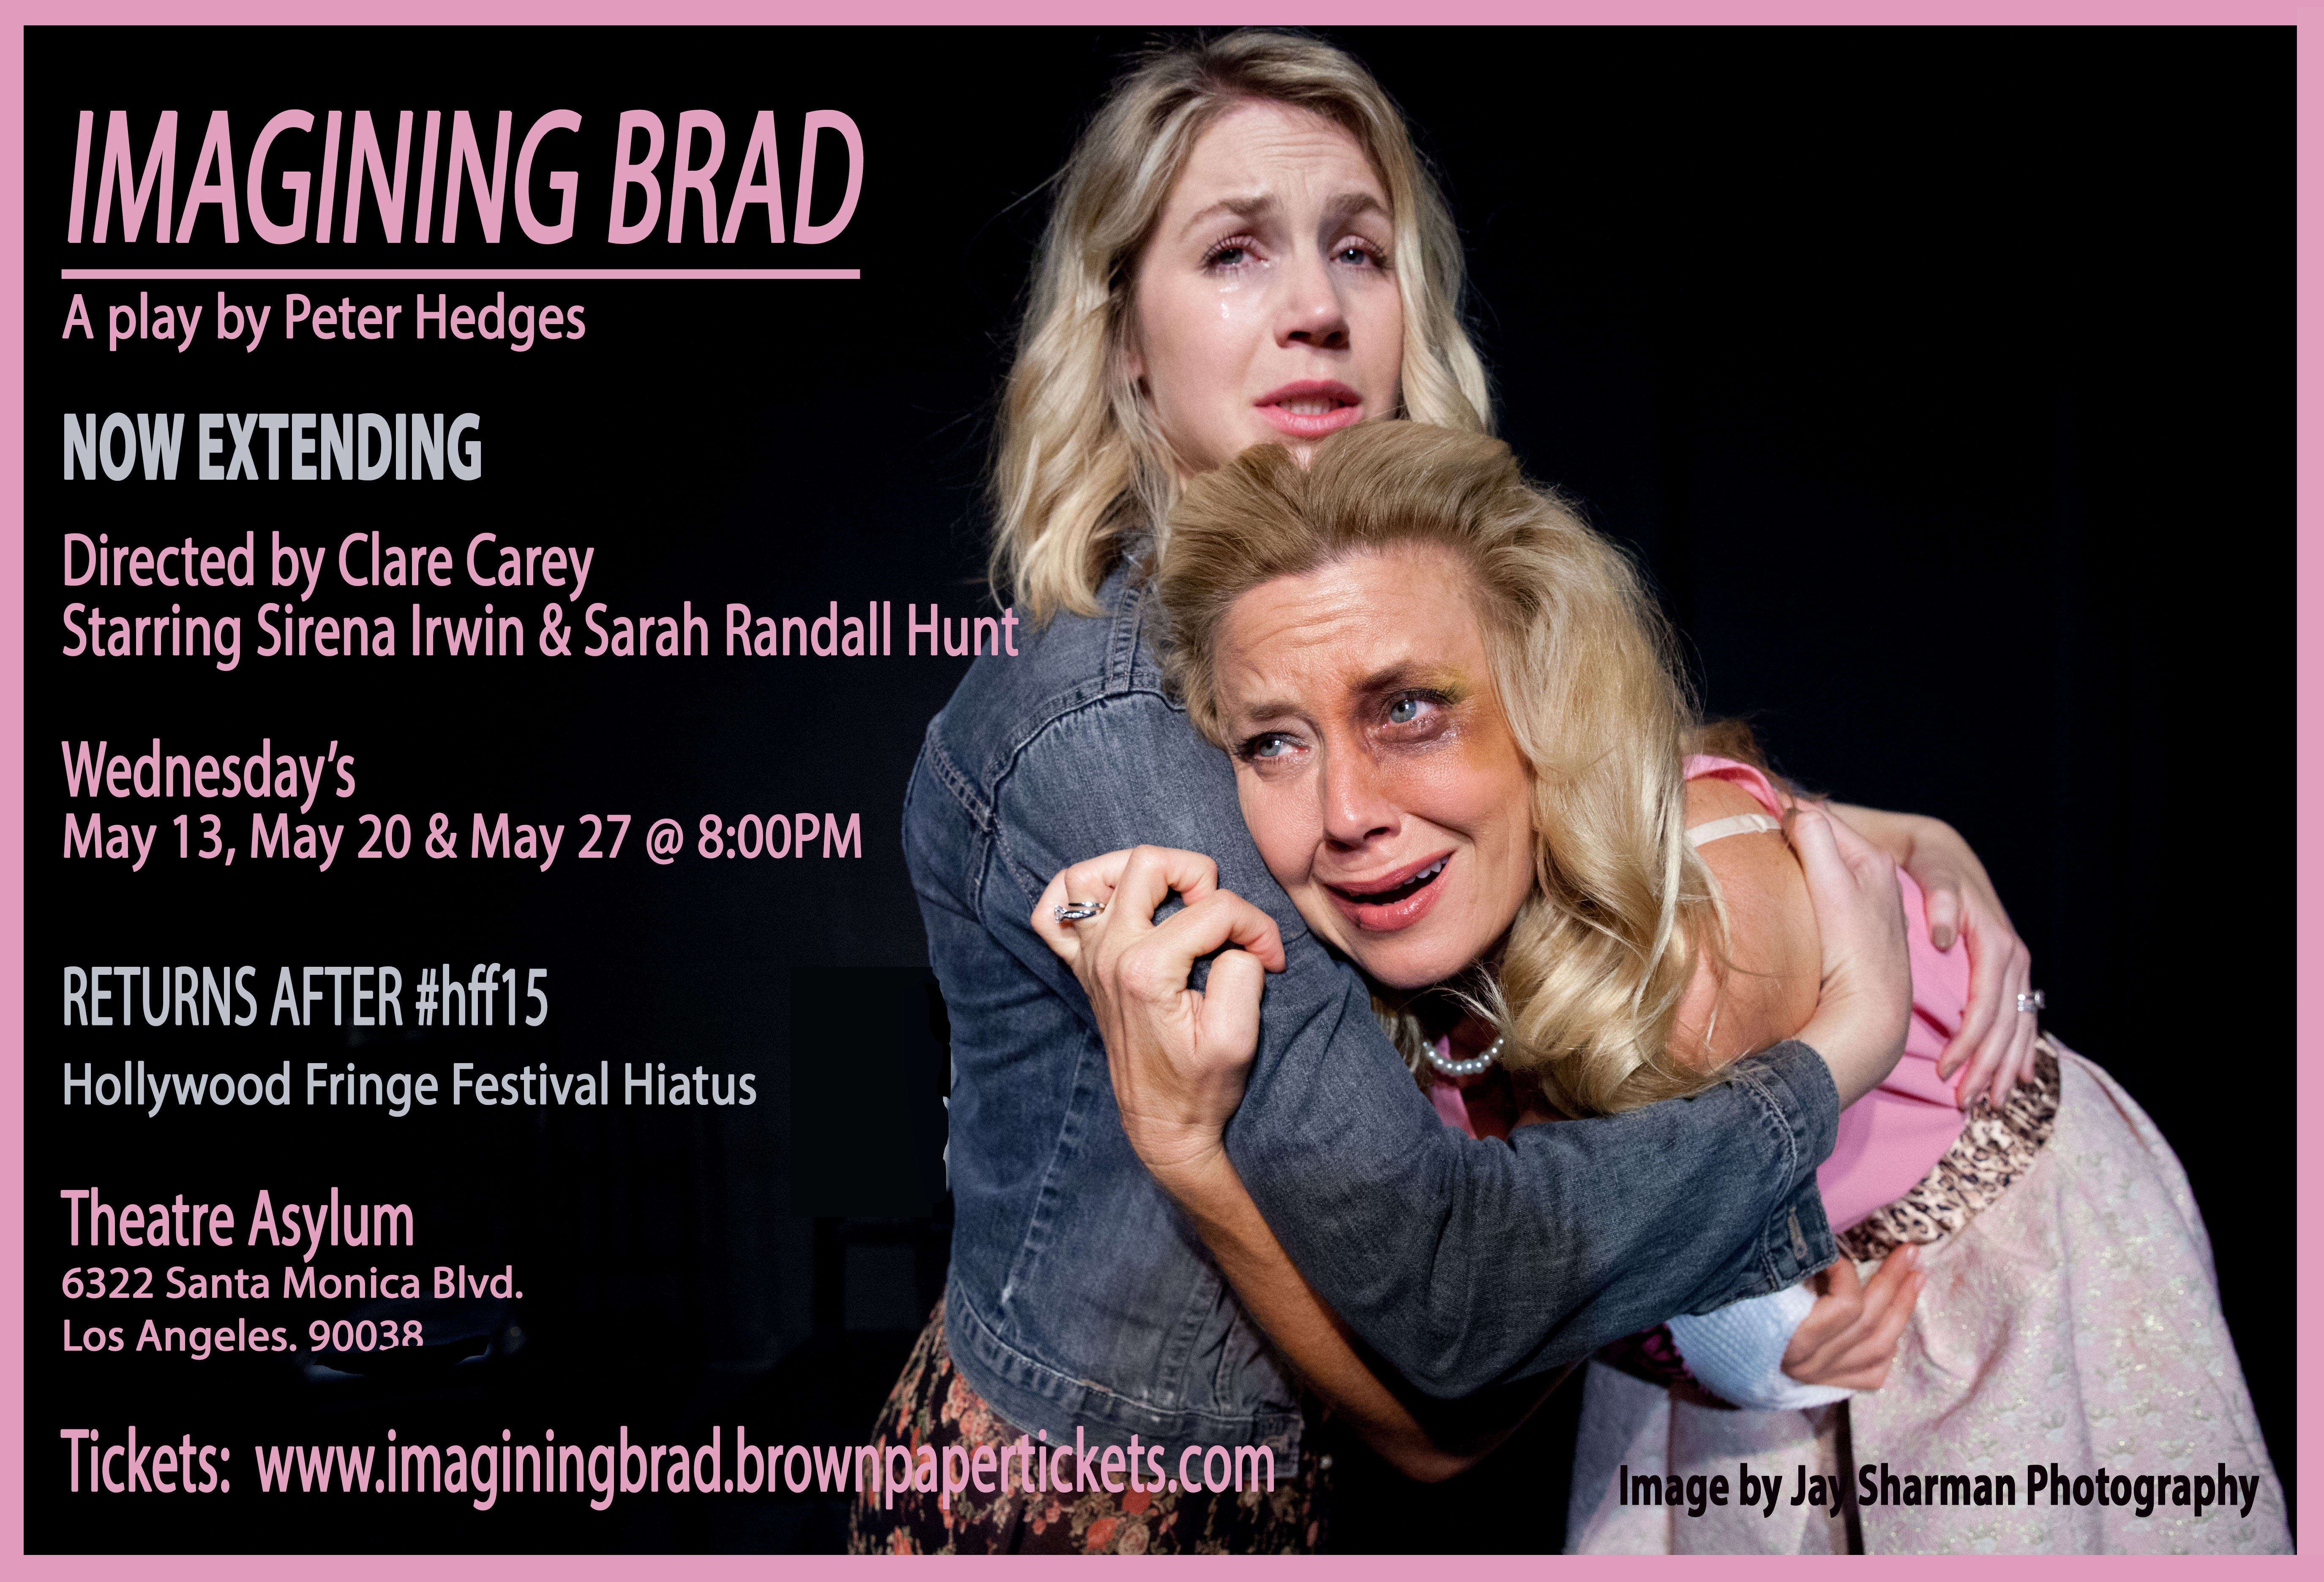 Imagining Brad at Theatre Asylum Has Been Extended. Here’s why you should go: